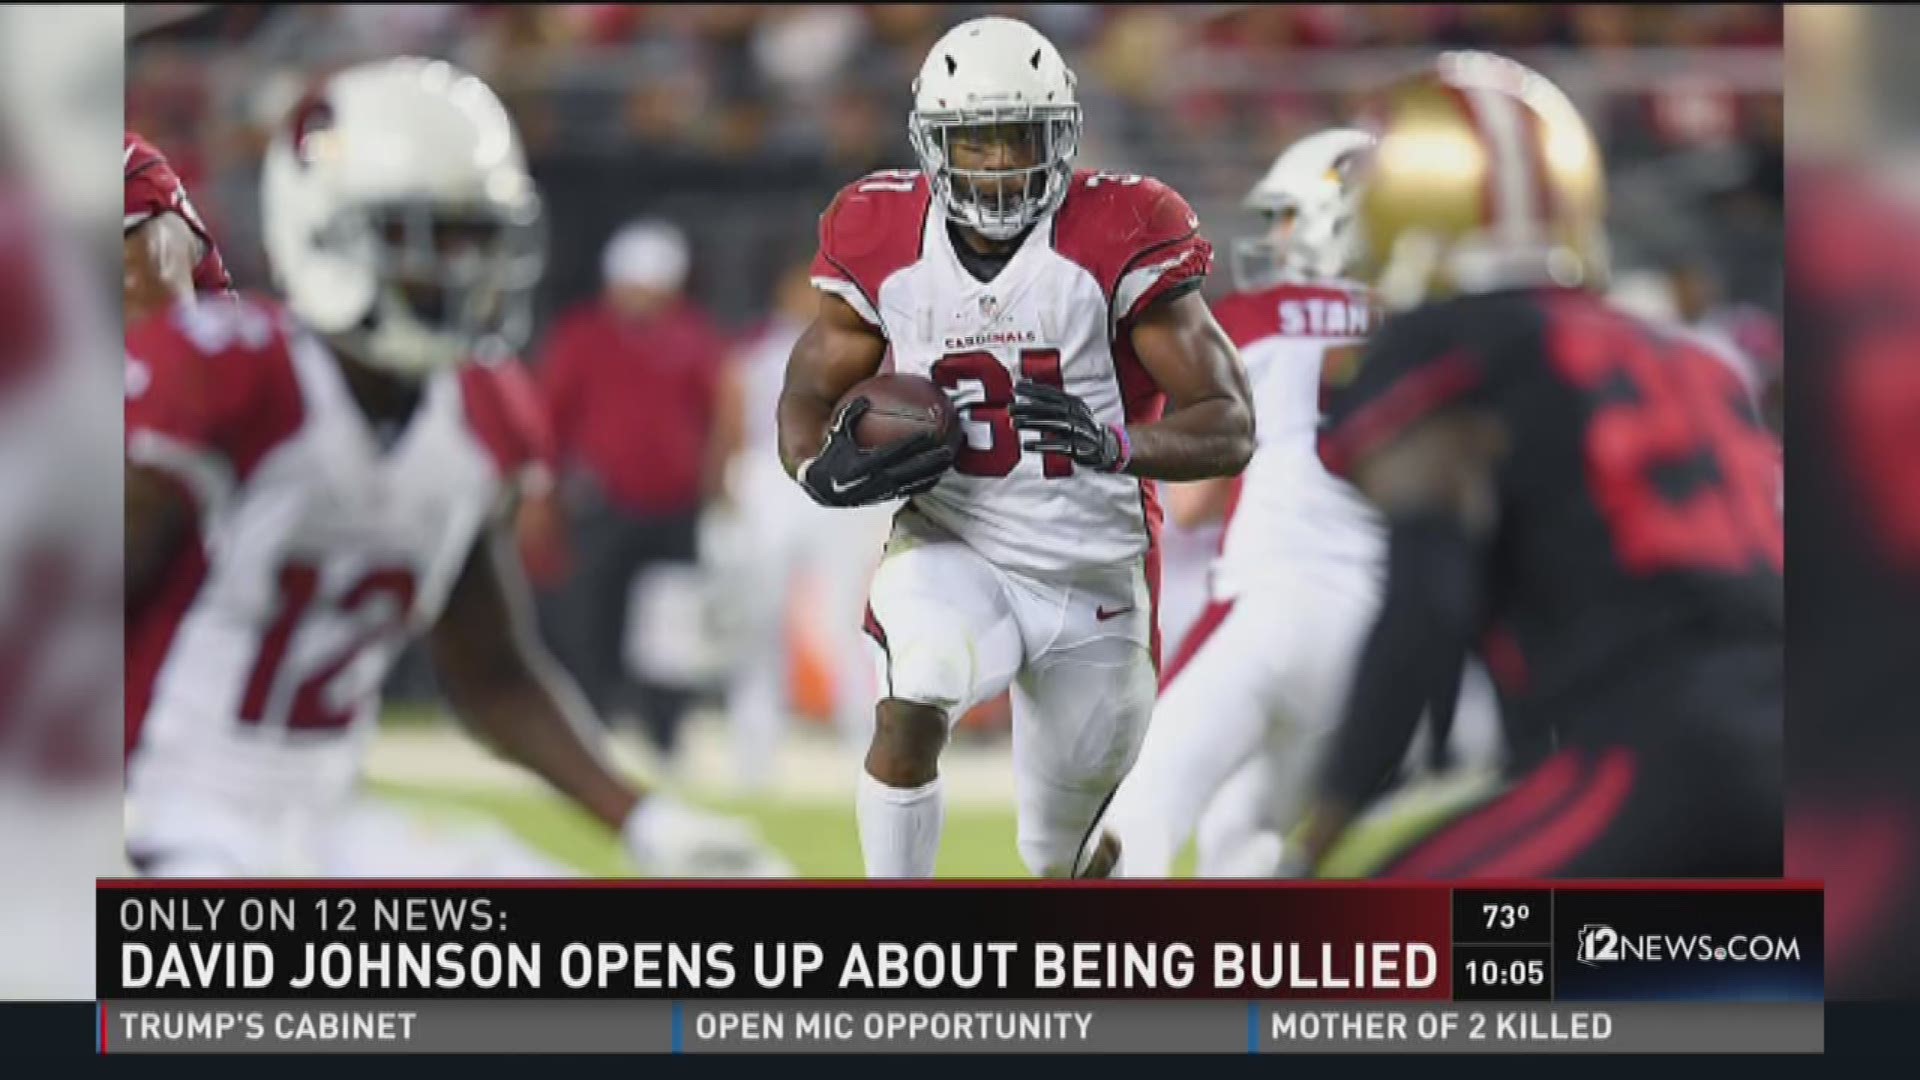 David Johnson opens up about being bullied